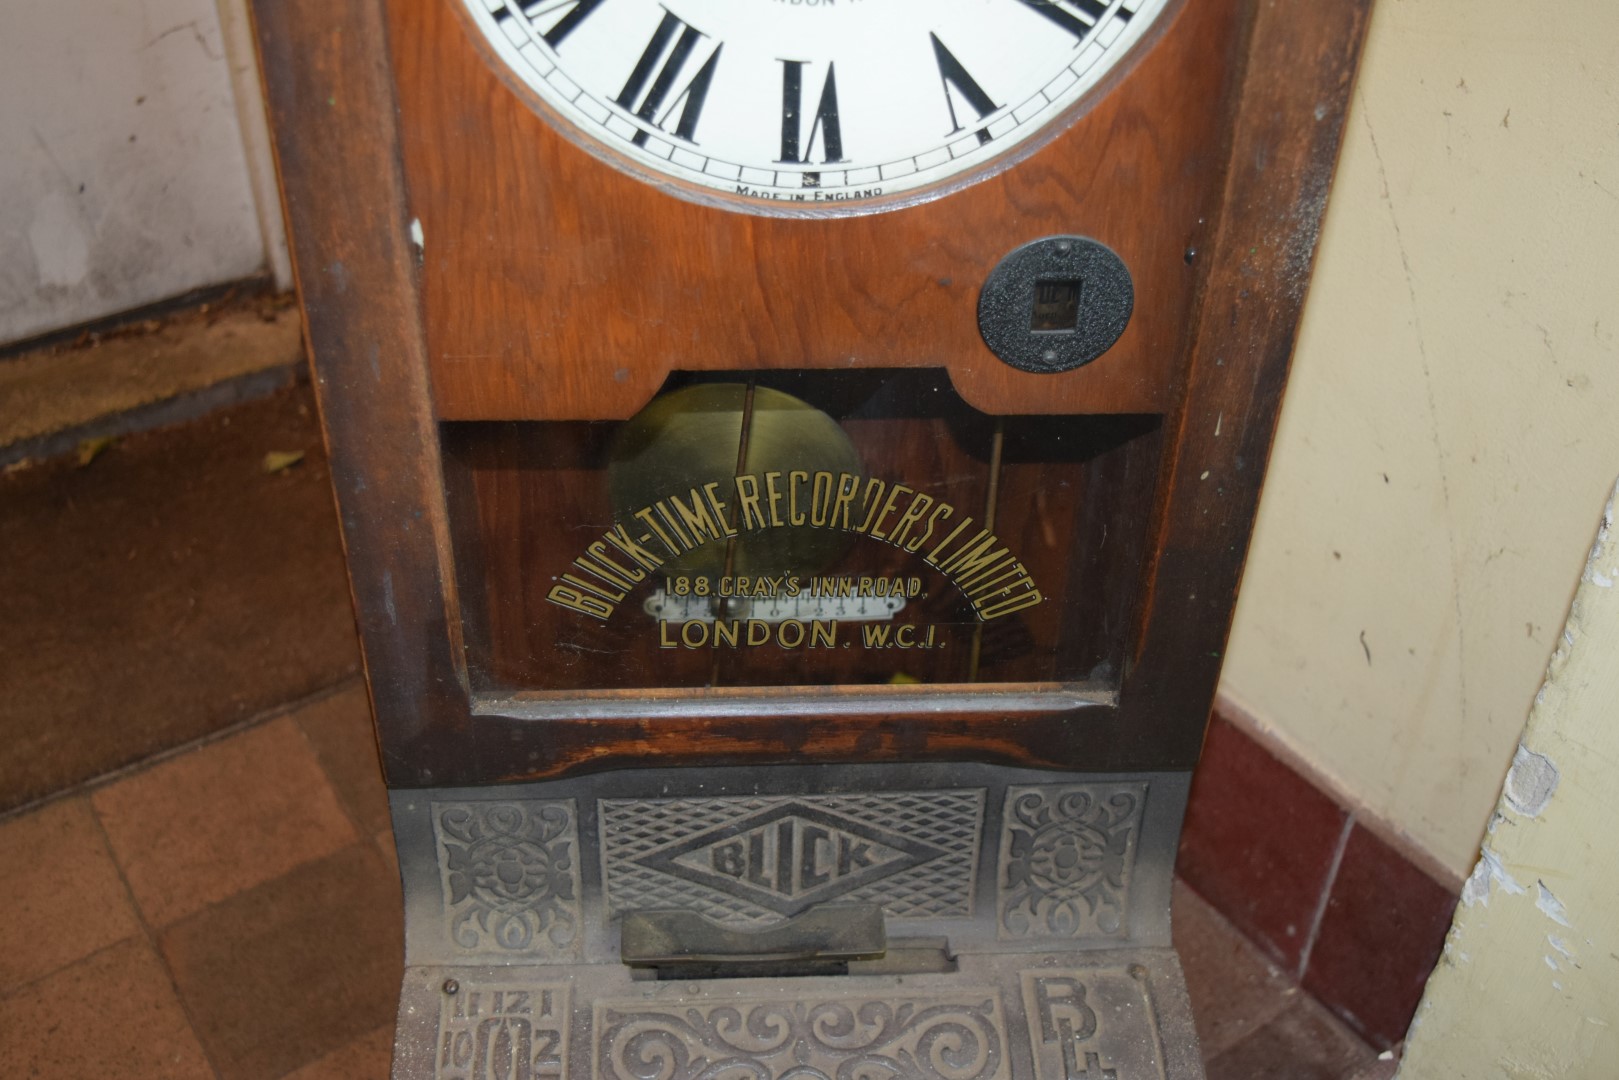 A Blick Time Recorder. - Image 3 of 5